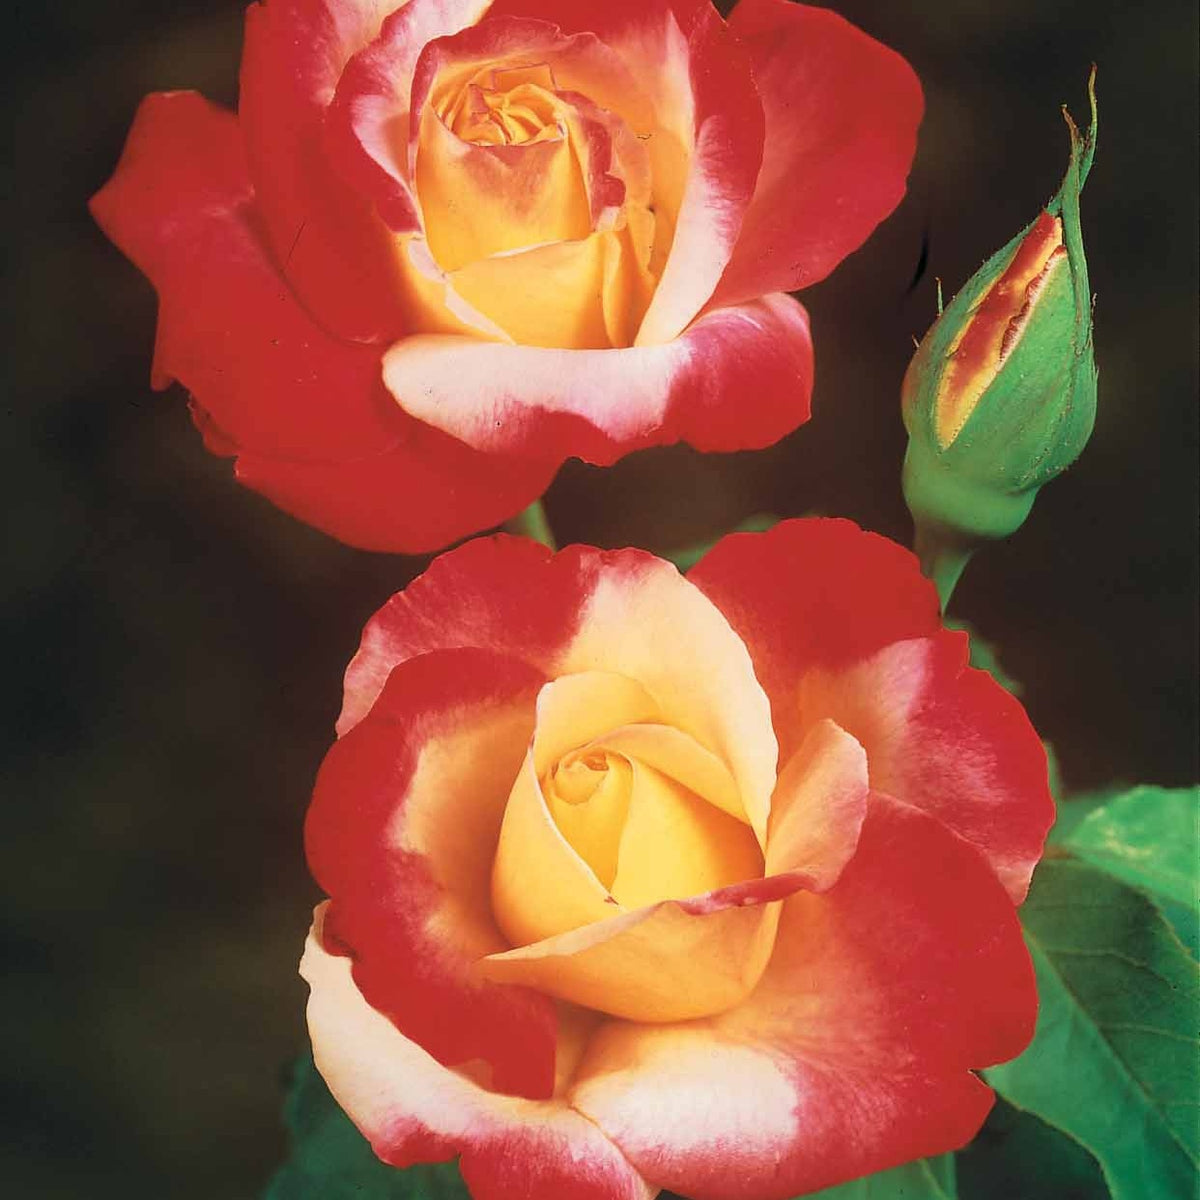 Collection de 3 Rosiers buissons : Famosa, Whisky, Double Delight - Rosa 'famosa', 'whisky', 'double delight' - Plantes